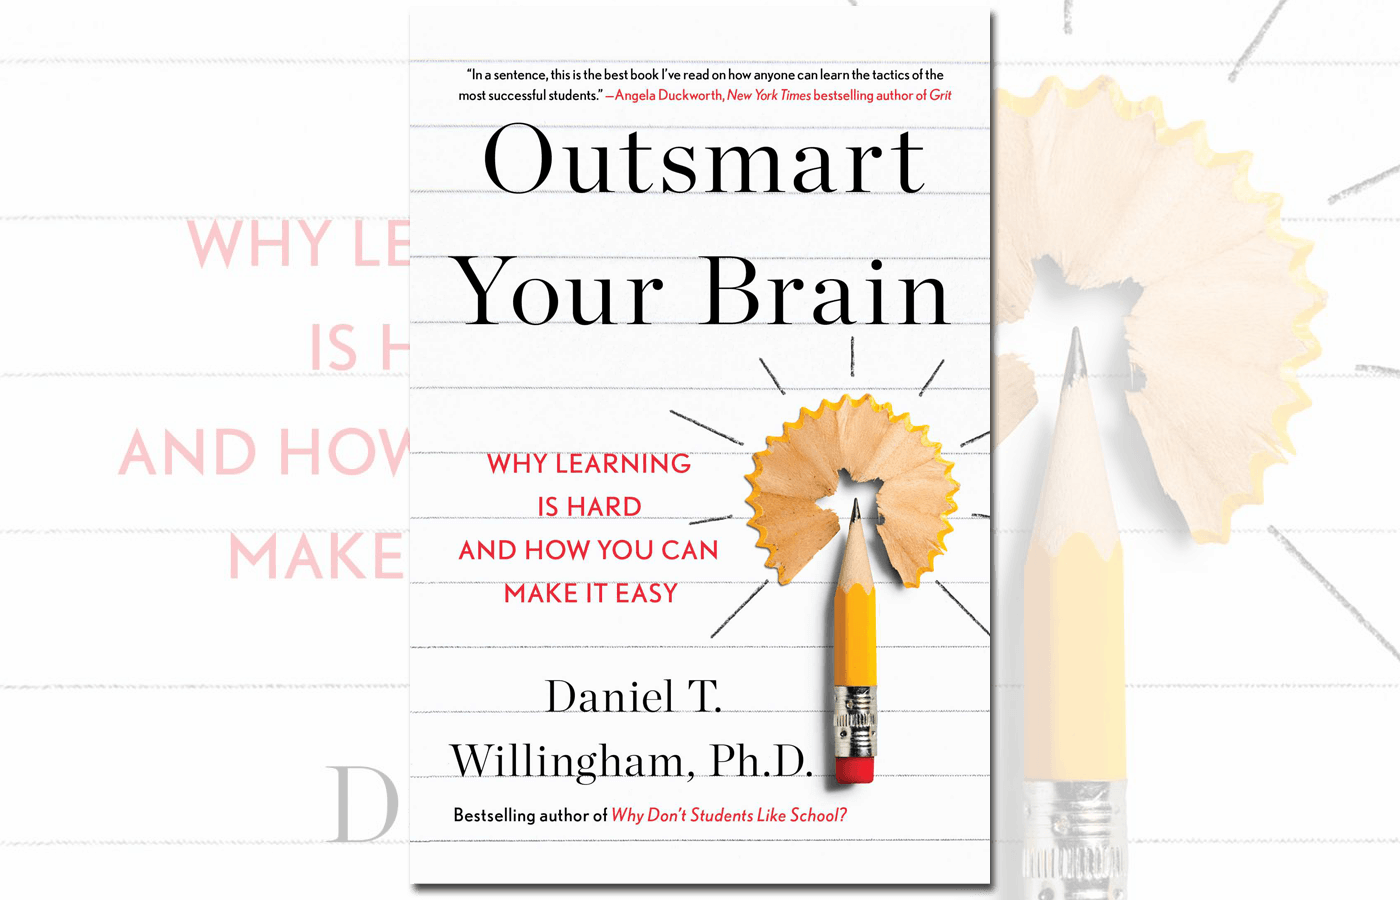 Book cover of "Outsmart Your Brain: Why Learning Is Hard and How You Can Make It Easy" by Daniel T. Willingham